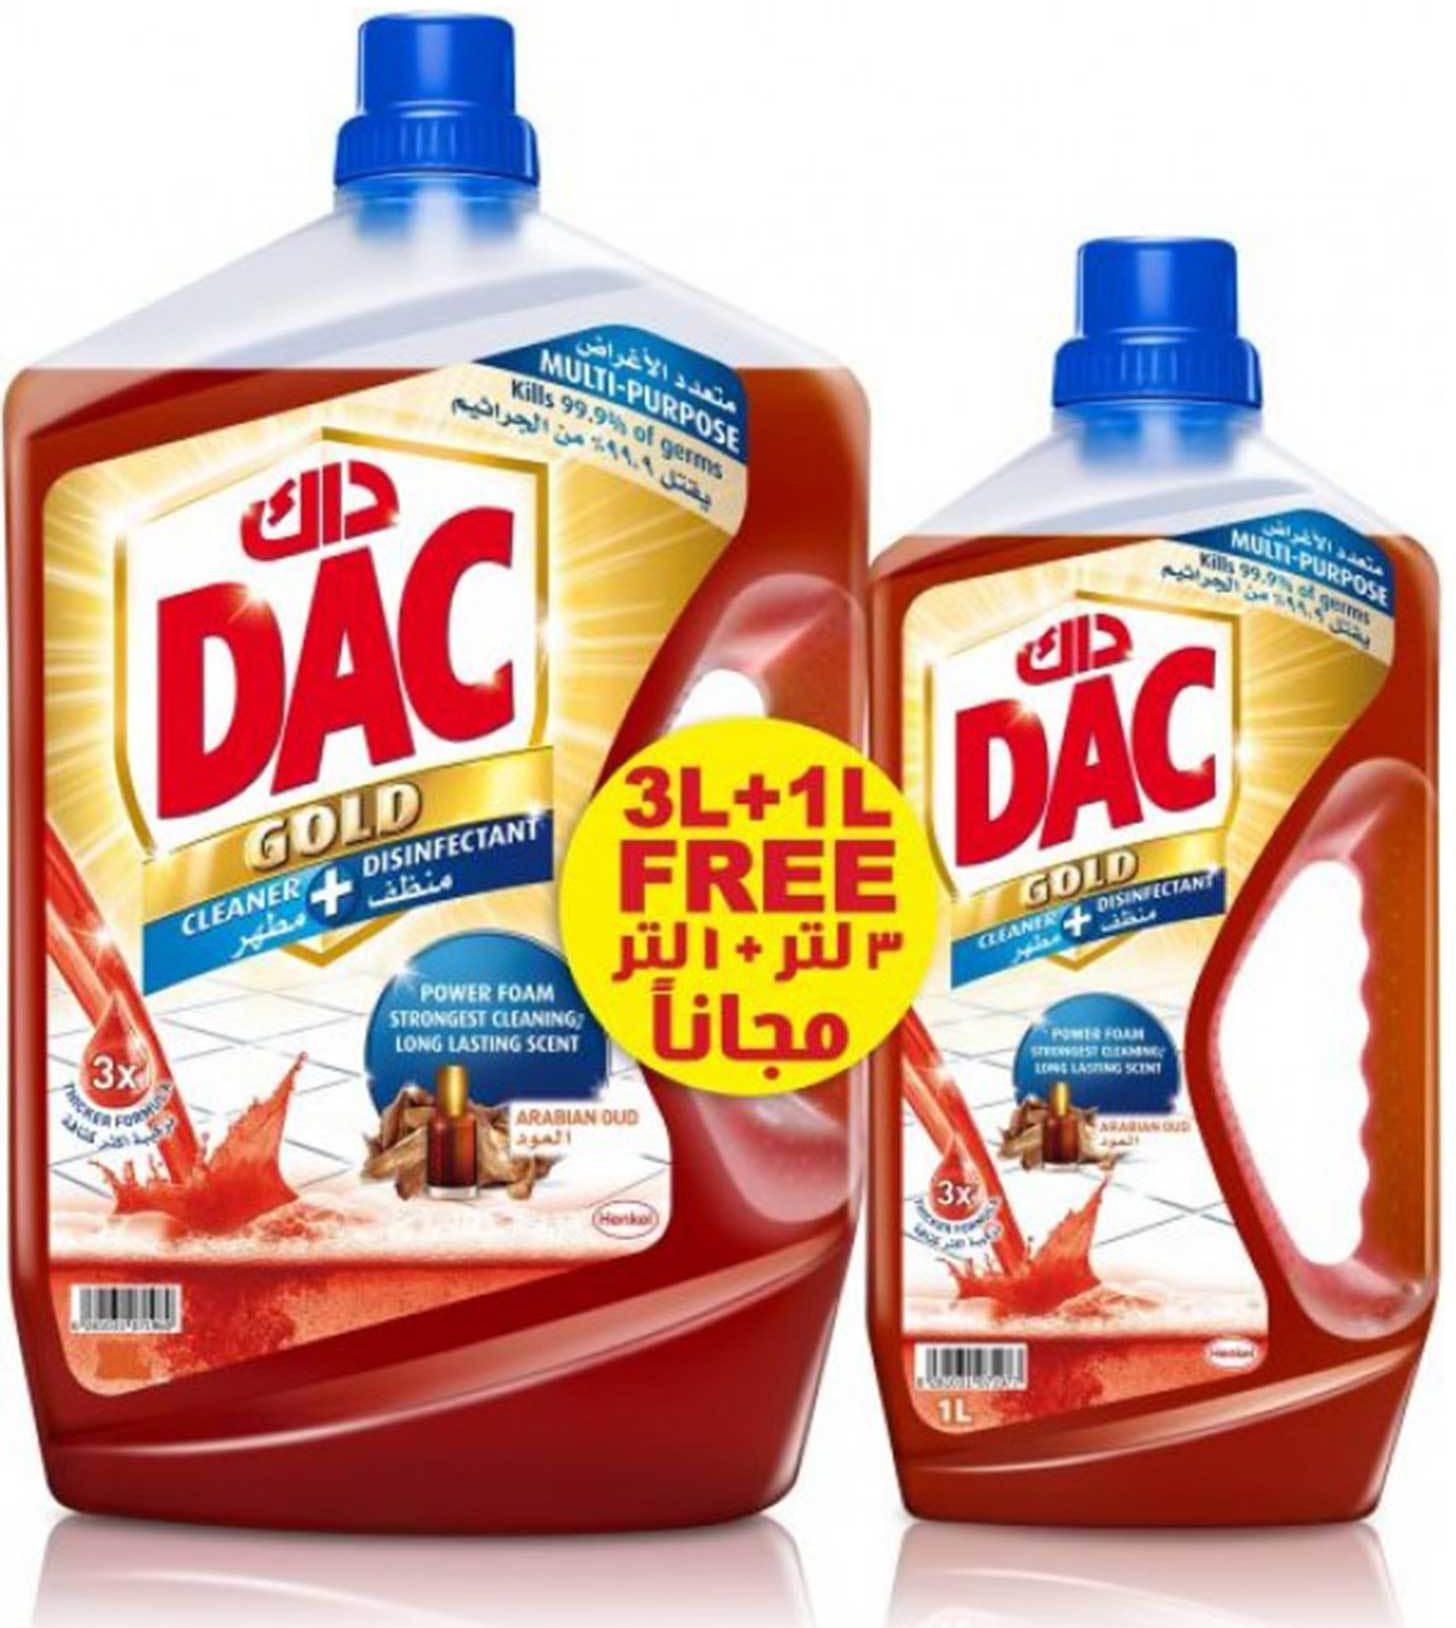 Dac cleaner and disinfectant  gold arabian oud 3 L+1 L free